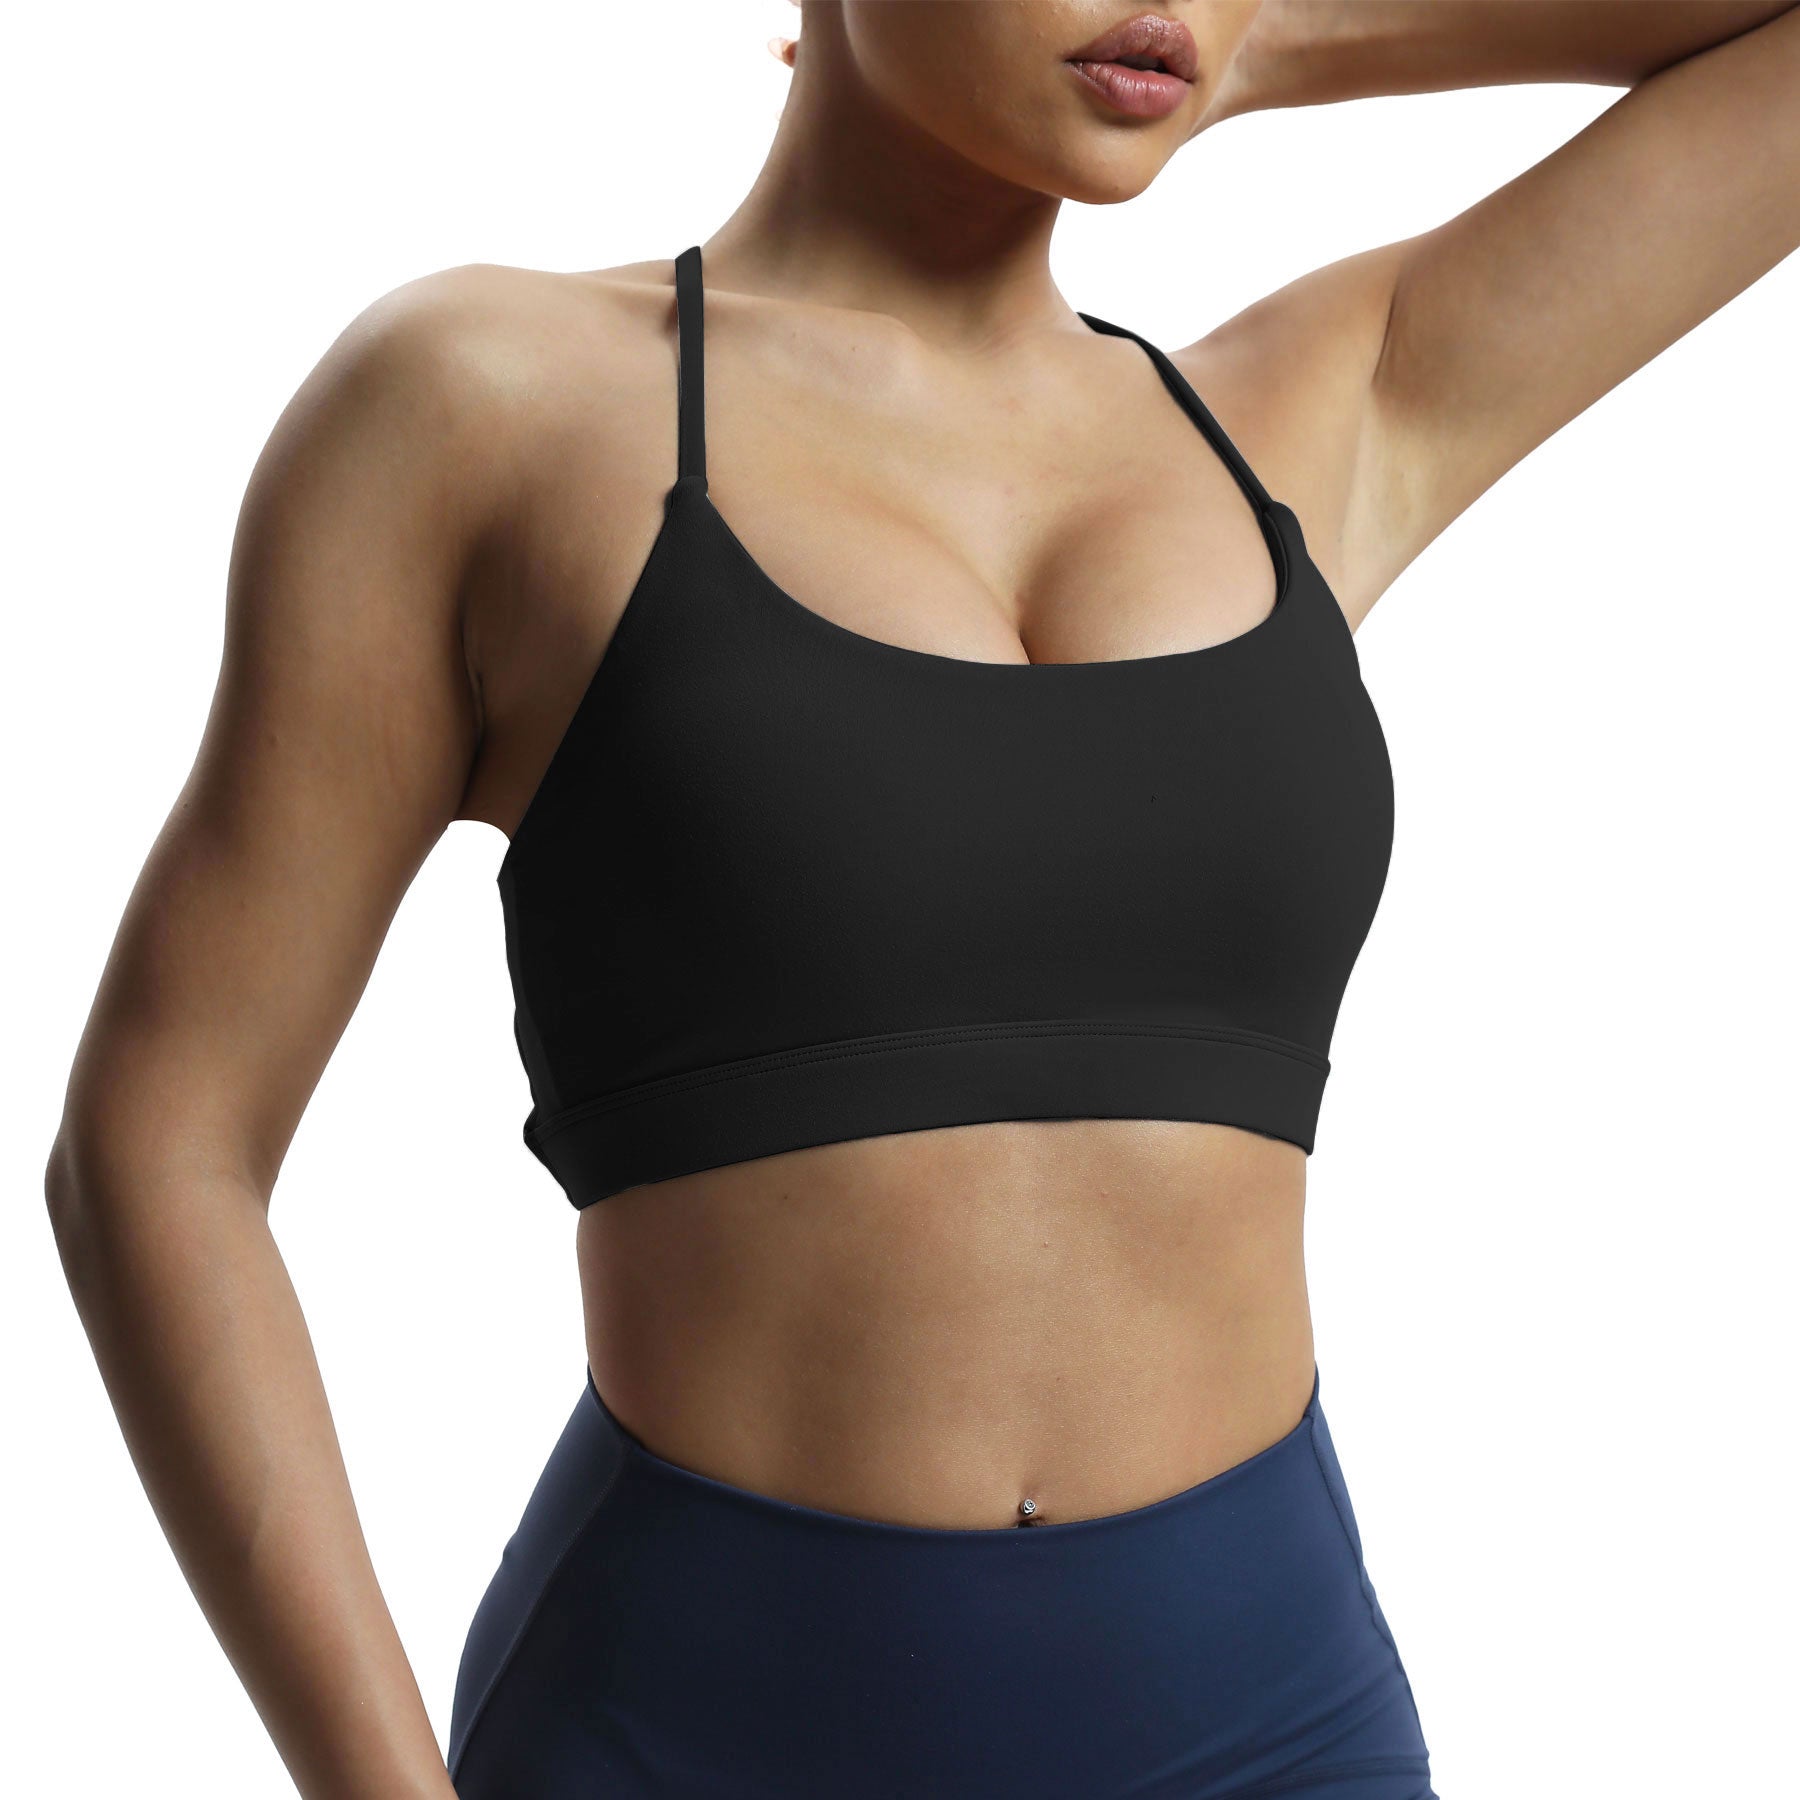 Aoxjox "Julie" Double Buckle Crossover Bra